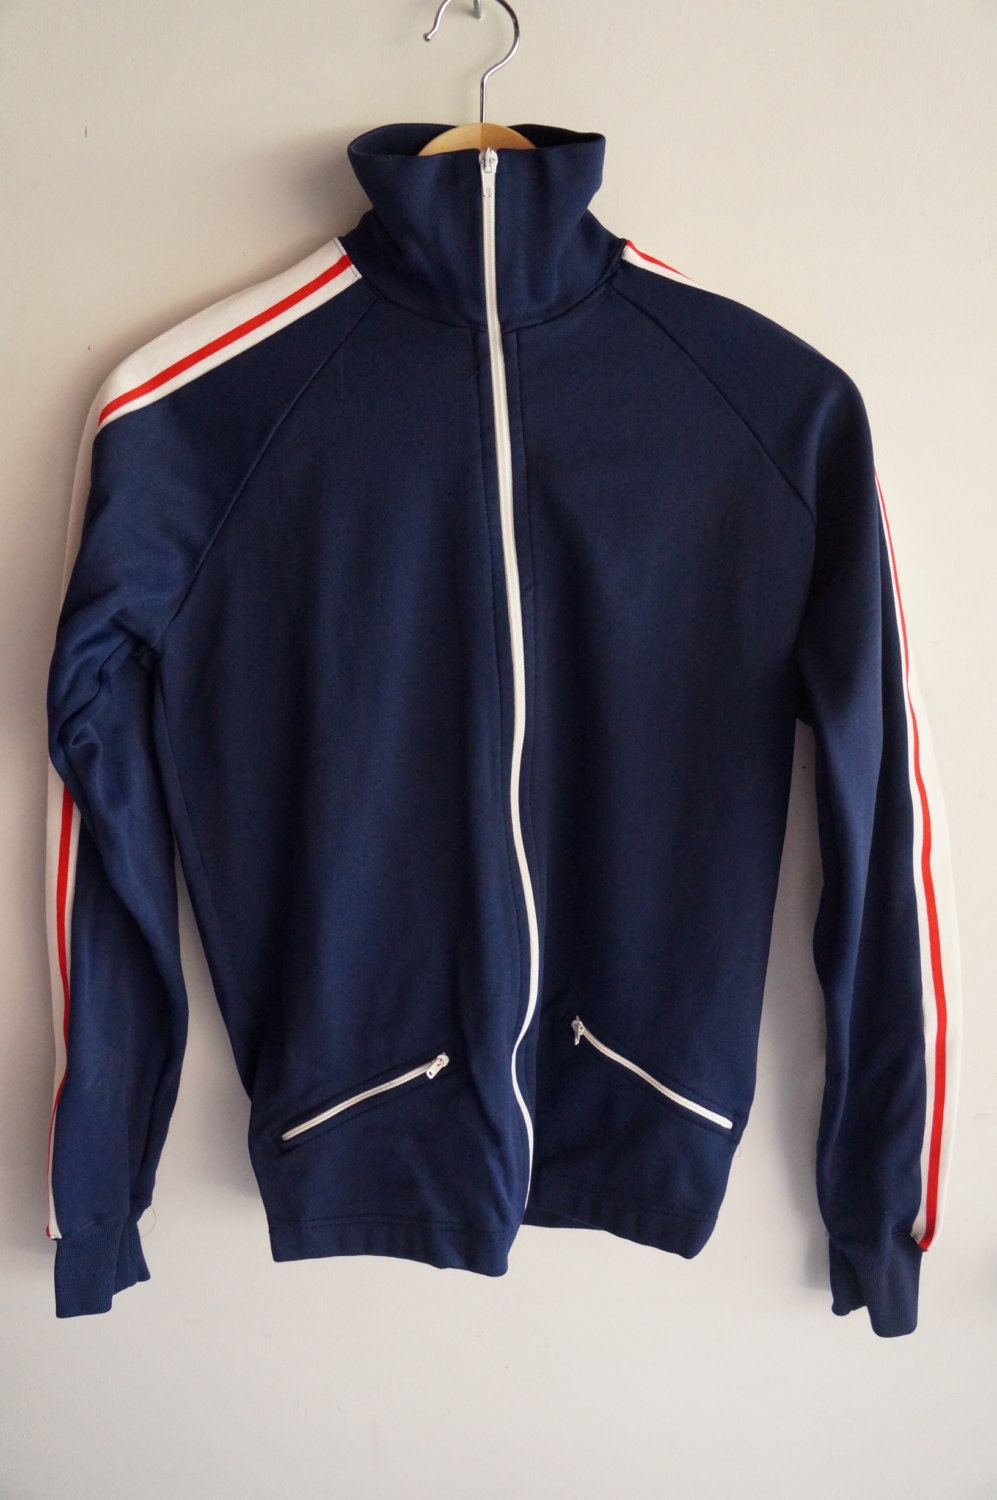 Vintage 70's Tracksuit Top Blue / White / Red Small